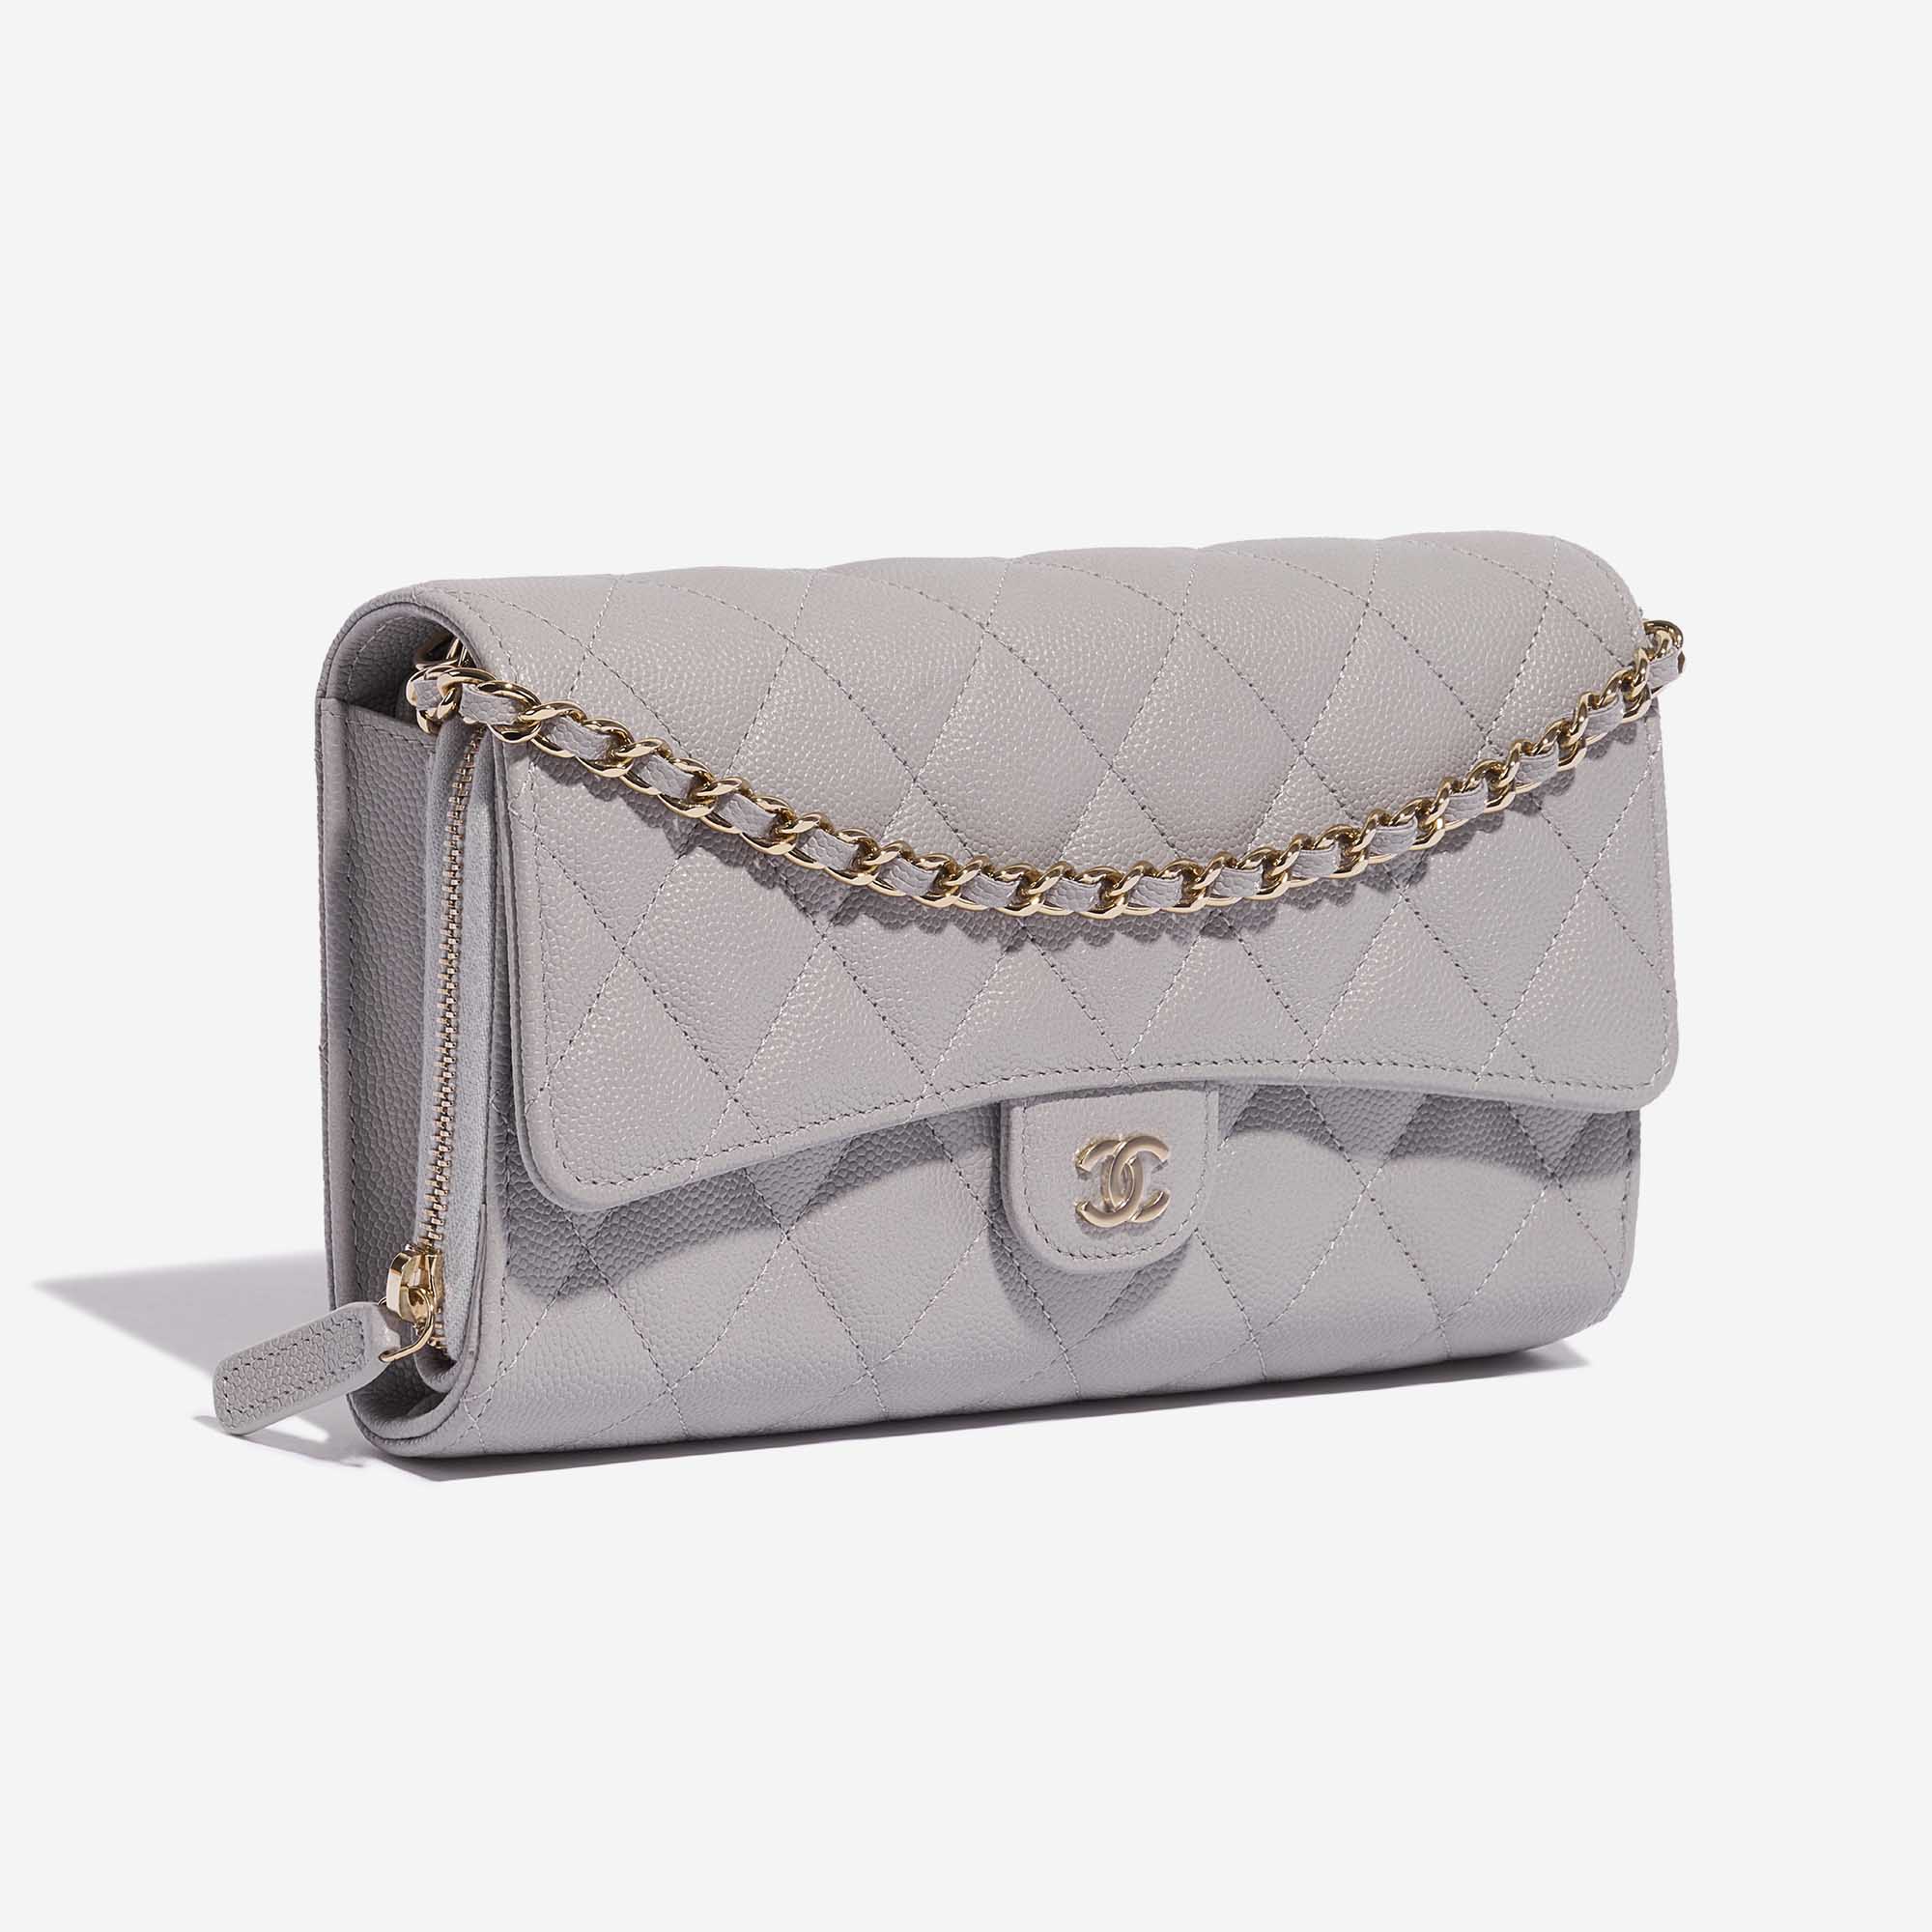 CHANEL Caviar Studded Small Deauville Tote Grey 637730